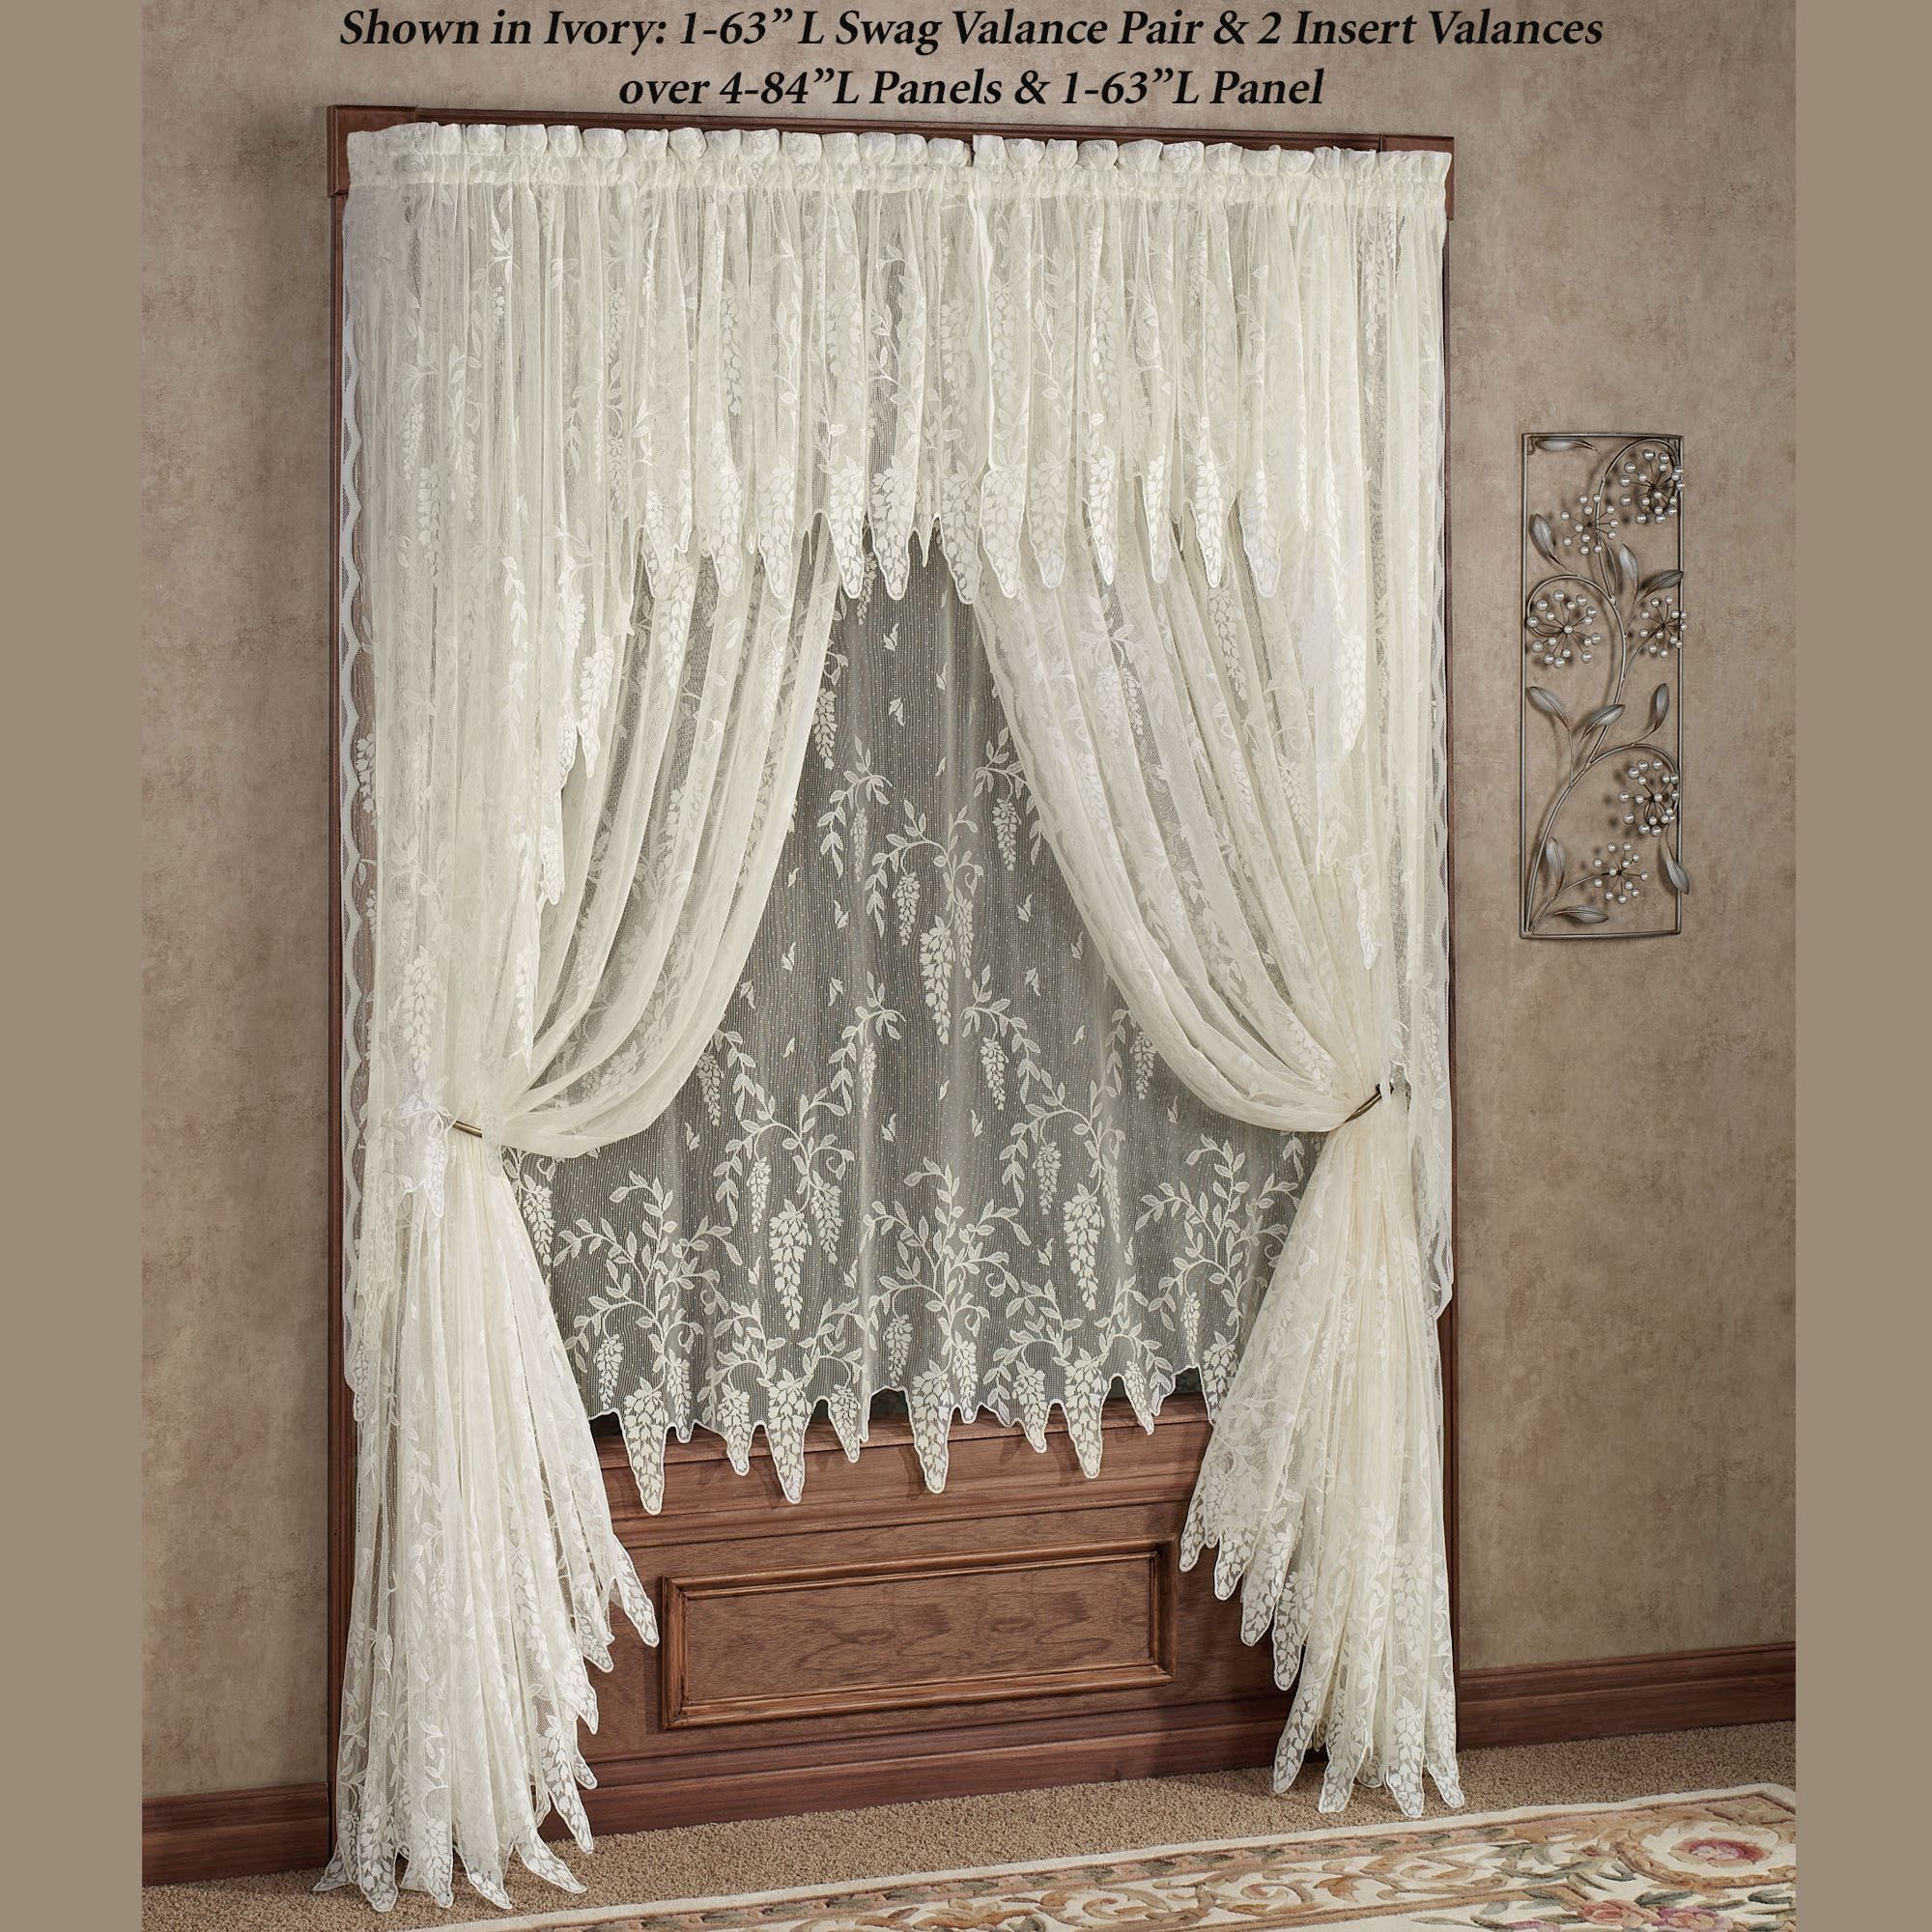 Wisteria Arbor Lace Window Treatments For Lace Curtains 